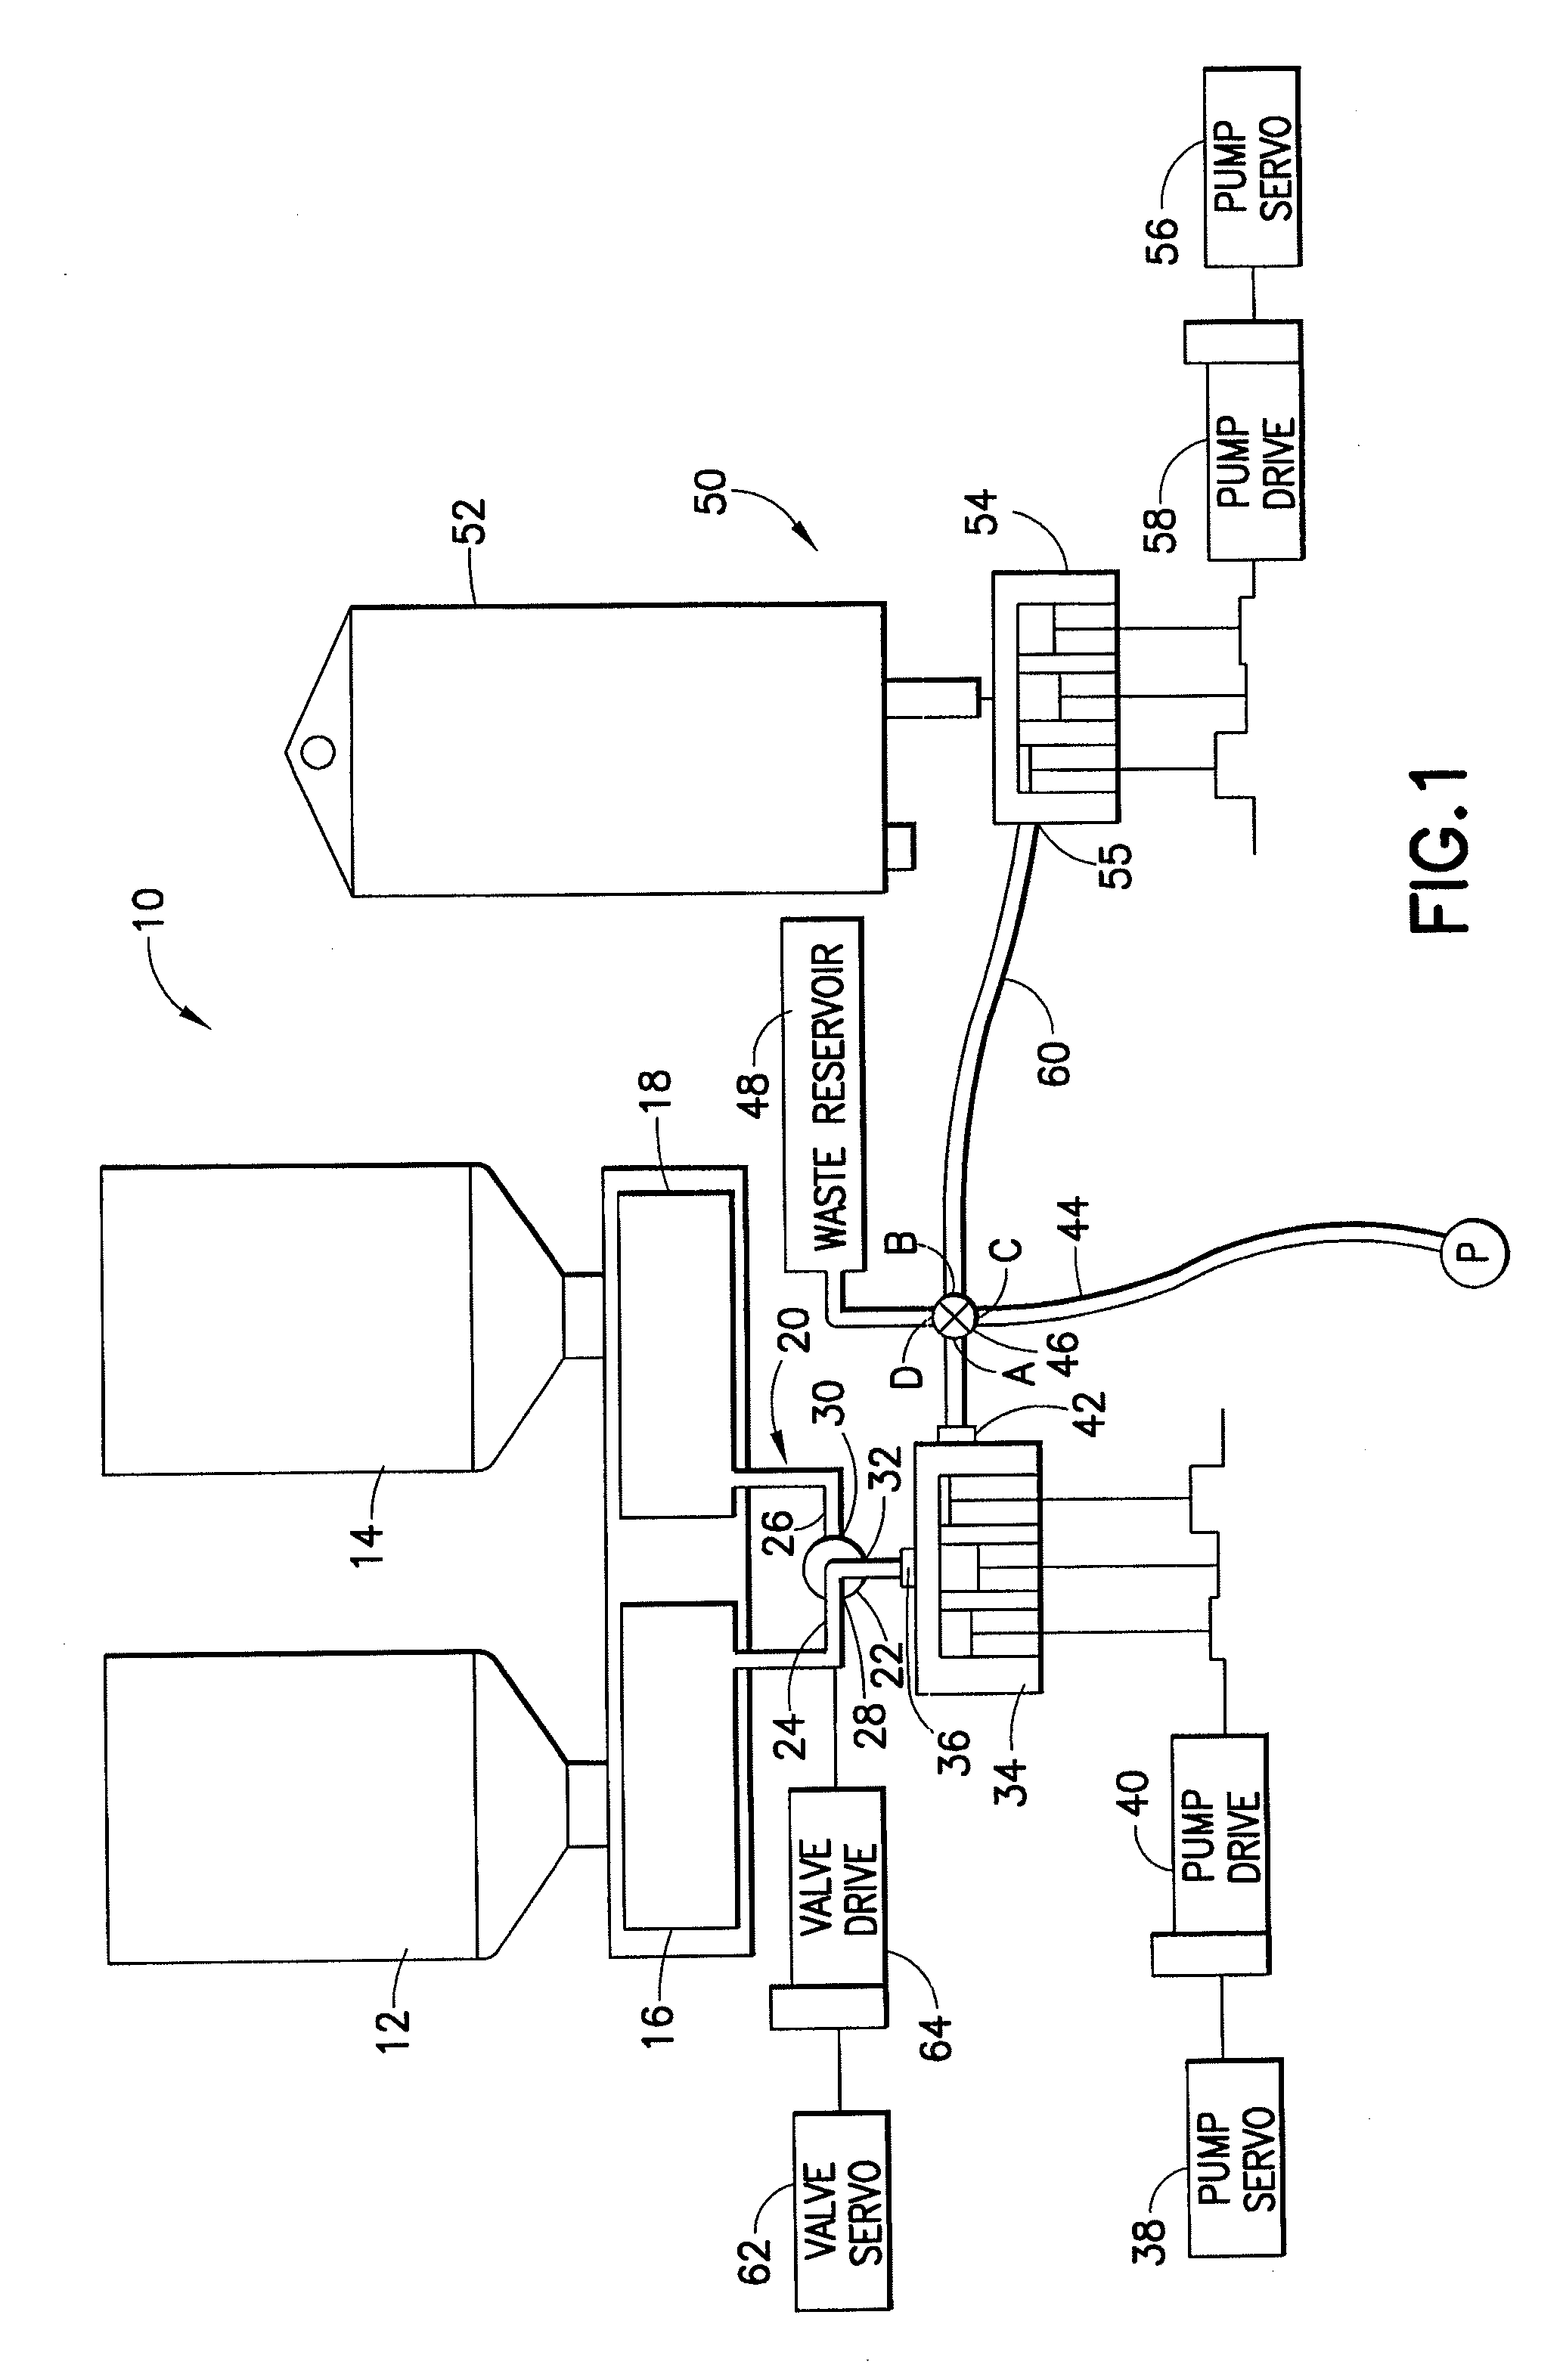 System and method for proportional mixing and continuous delivery of fluids